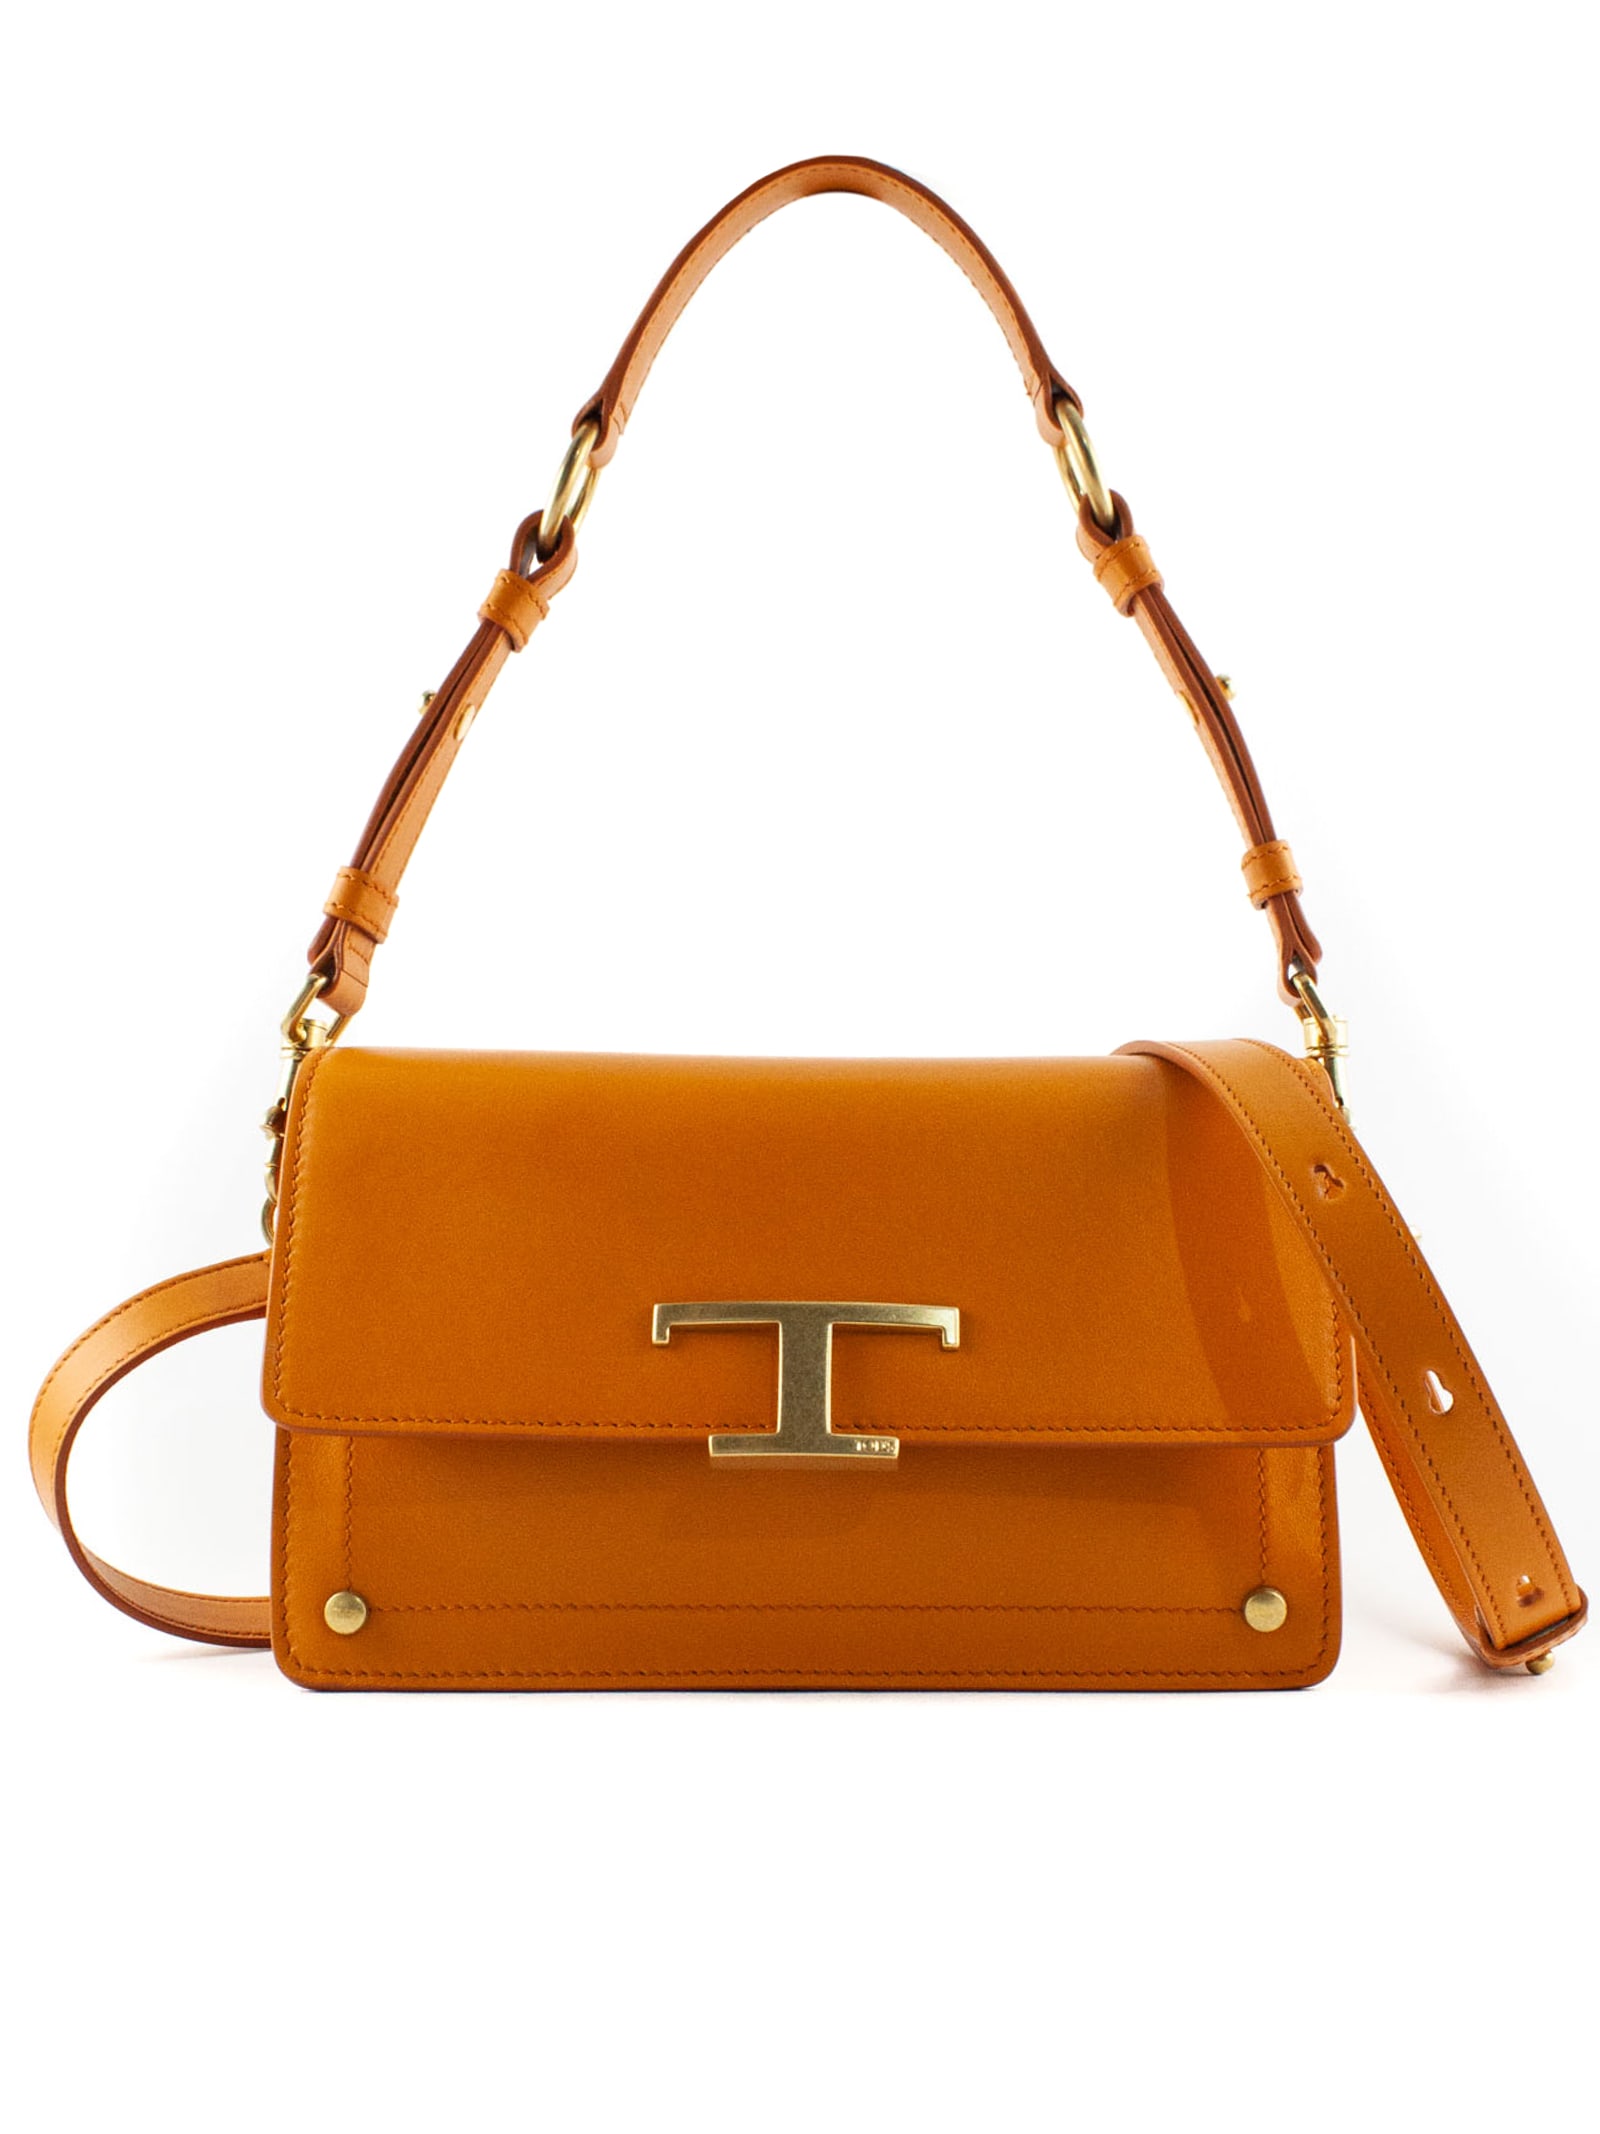 Tods 2 Internal Compartmentsinternal Pocketdimensions: 23.5 X 14.5 X 11 Cm, Adjustable And Removable Shoulder Strap Approx 20 Cm